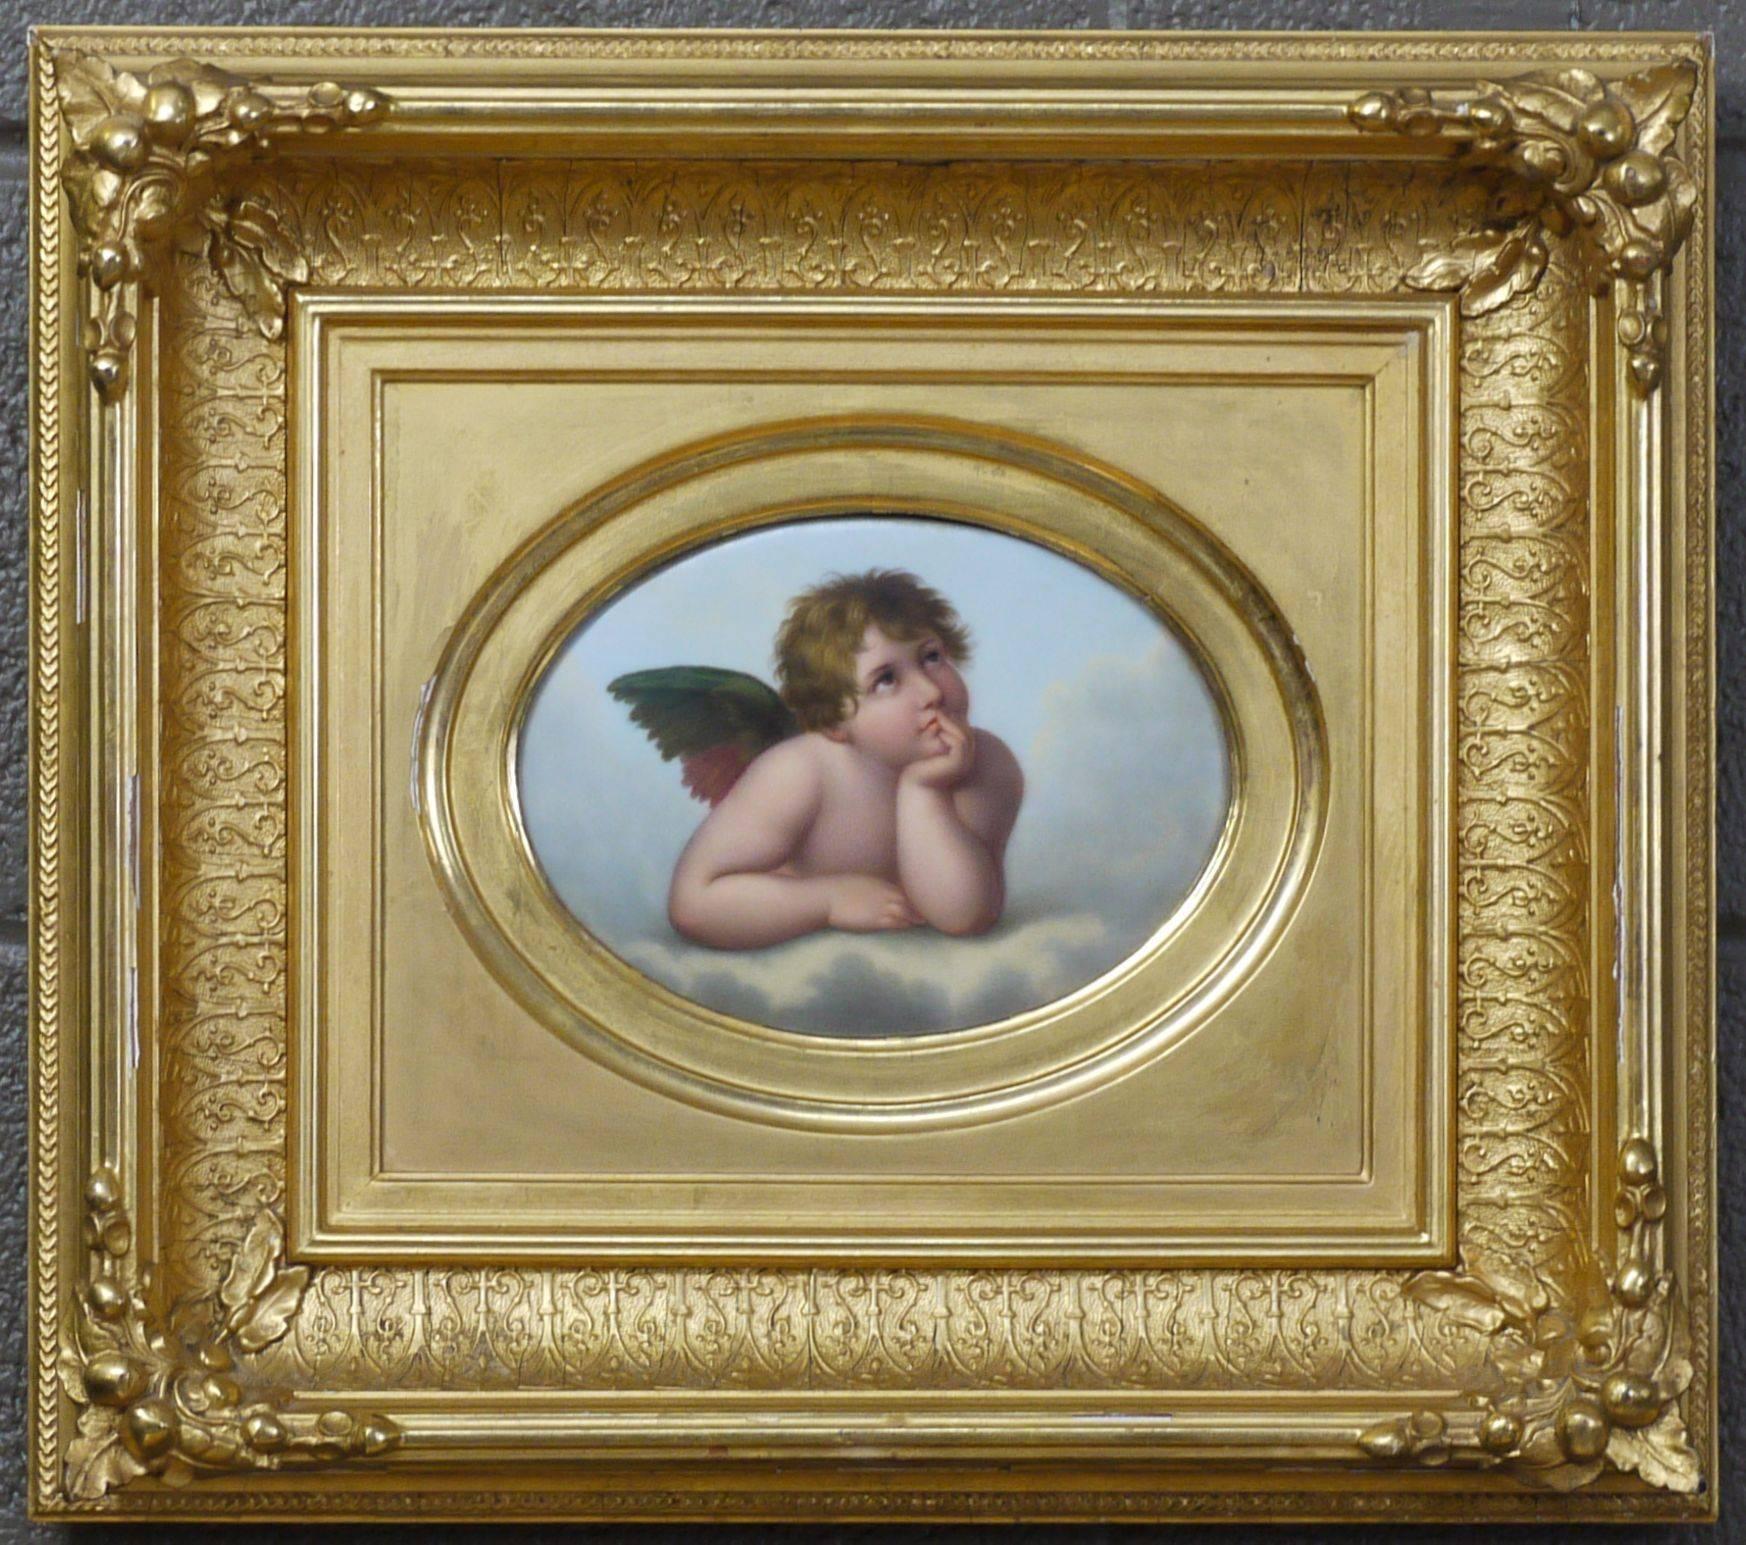 Absolutely stunning pair of enamel on porcelain plaques after Raphael's Cherubs in the Sistine Madonna. The detail work and subtleness of fades of color on these plaques is amazing. Plaques have original stickers from shops that were in New York